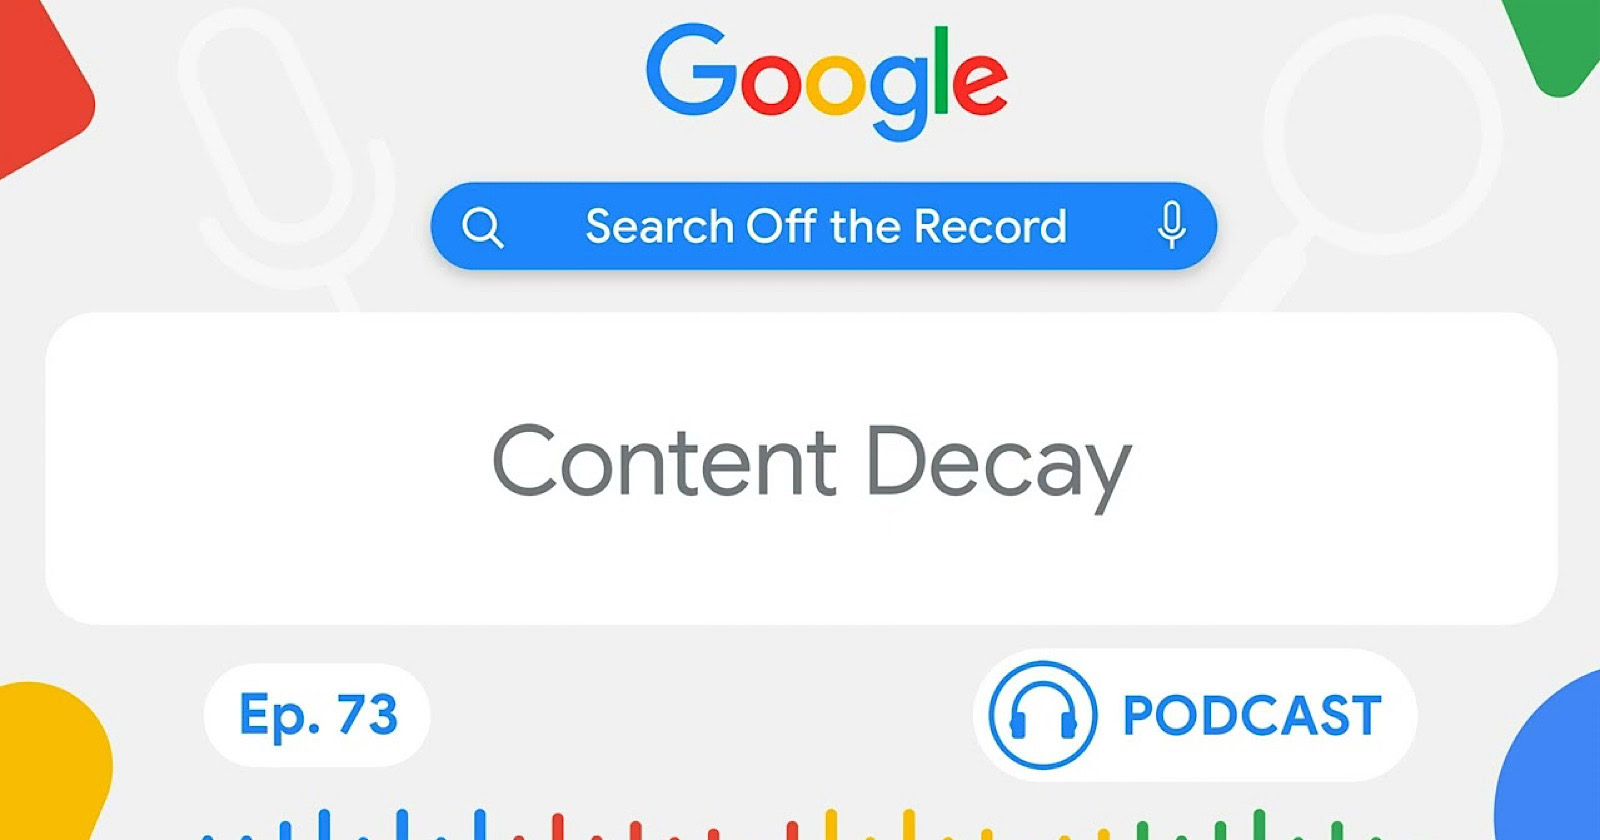 Google Defines "Content Decay" In New Podcast Episode